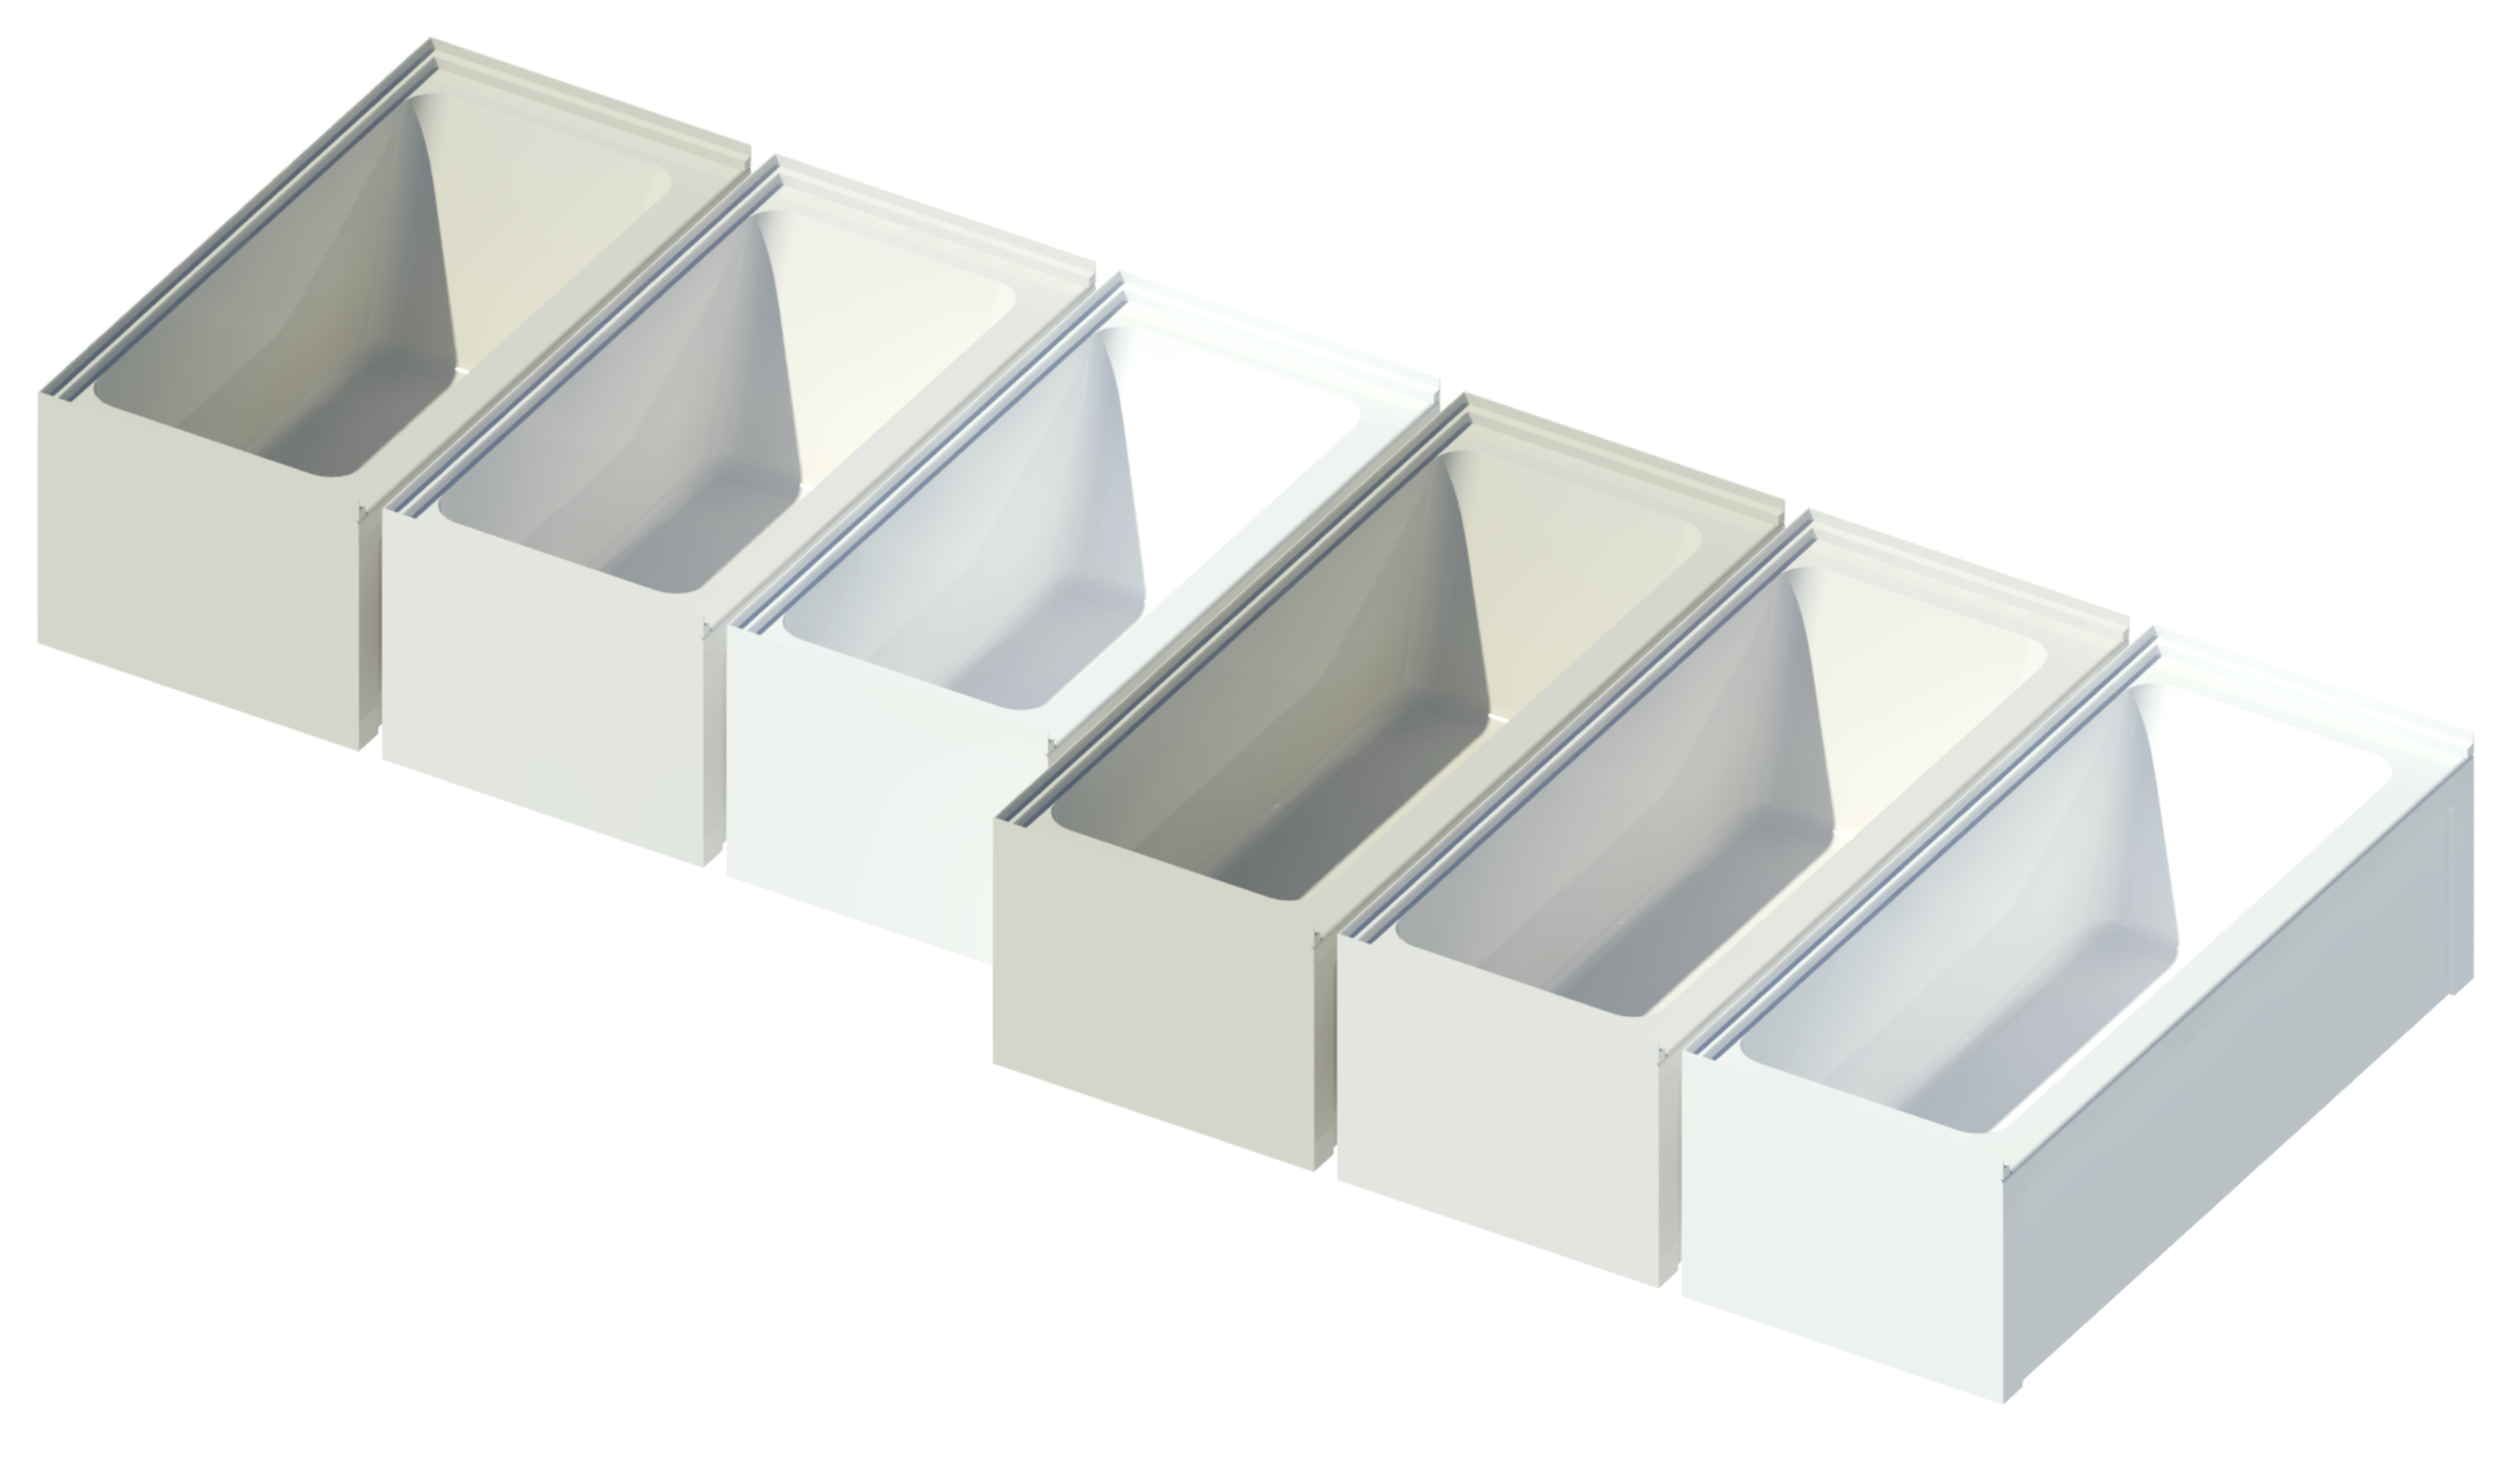 Revit raytrace showing Langley alcove bathtub variations in biscuit, white and almond finishes and two different sizes.